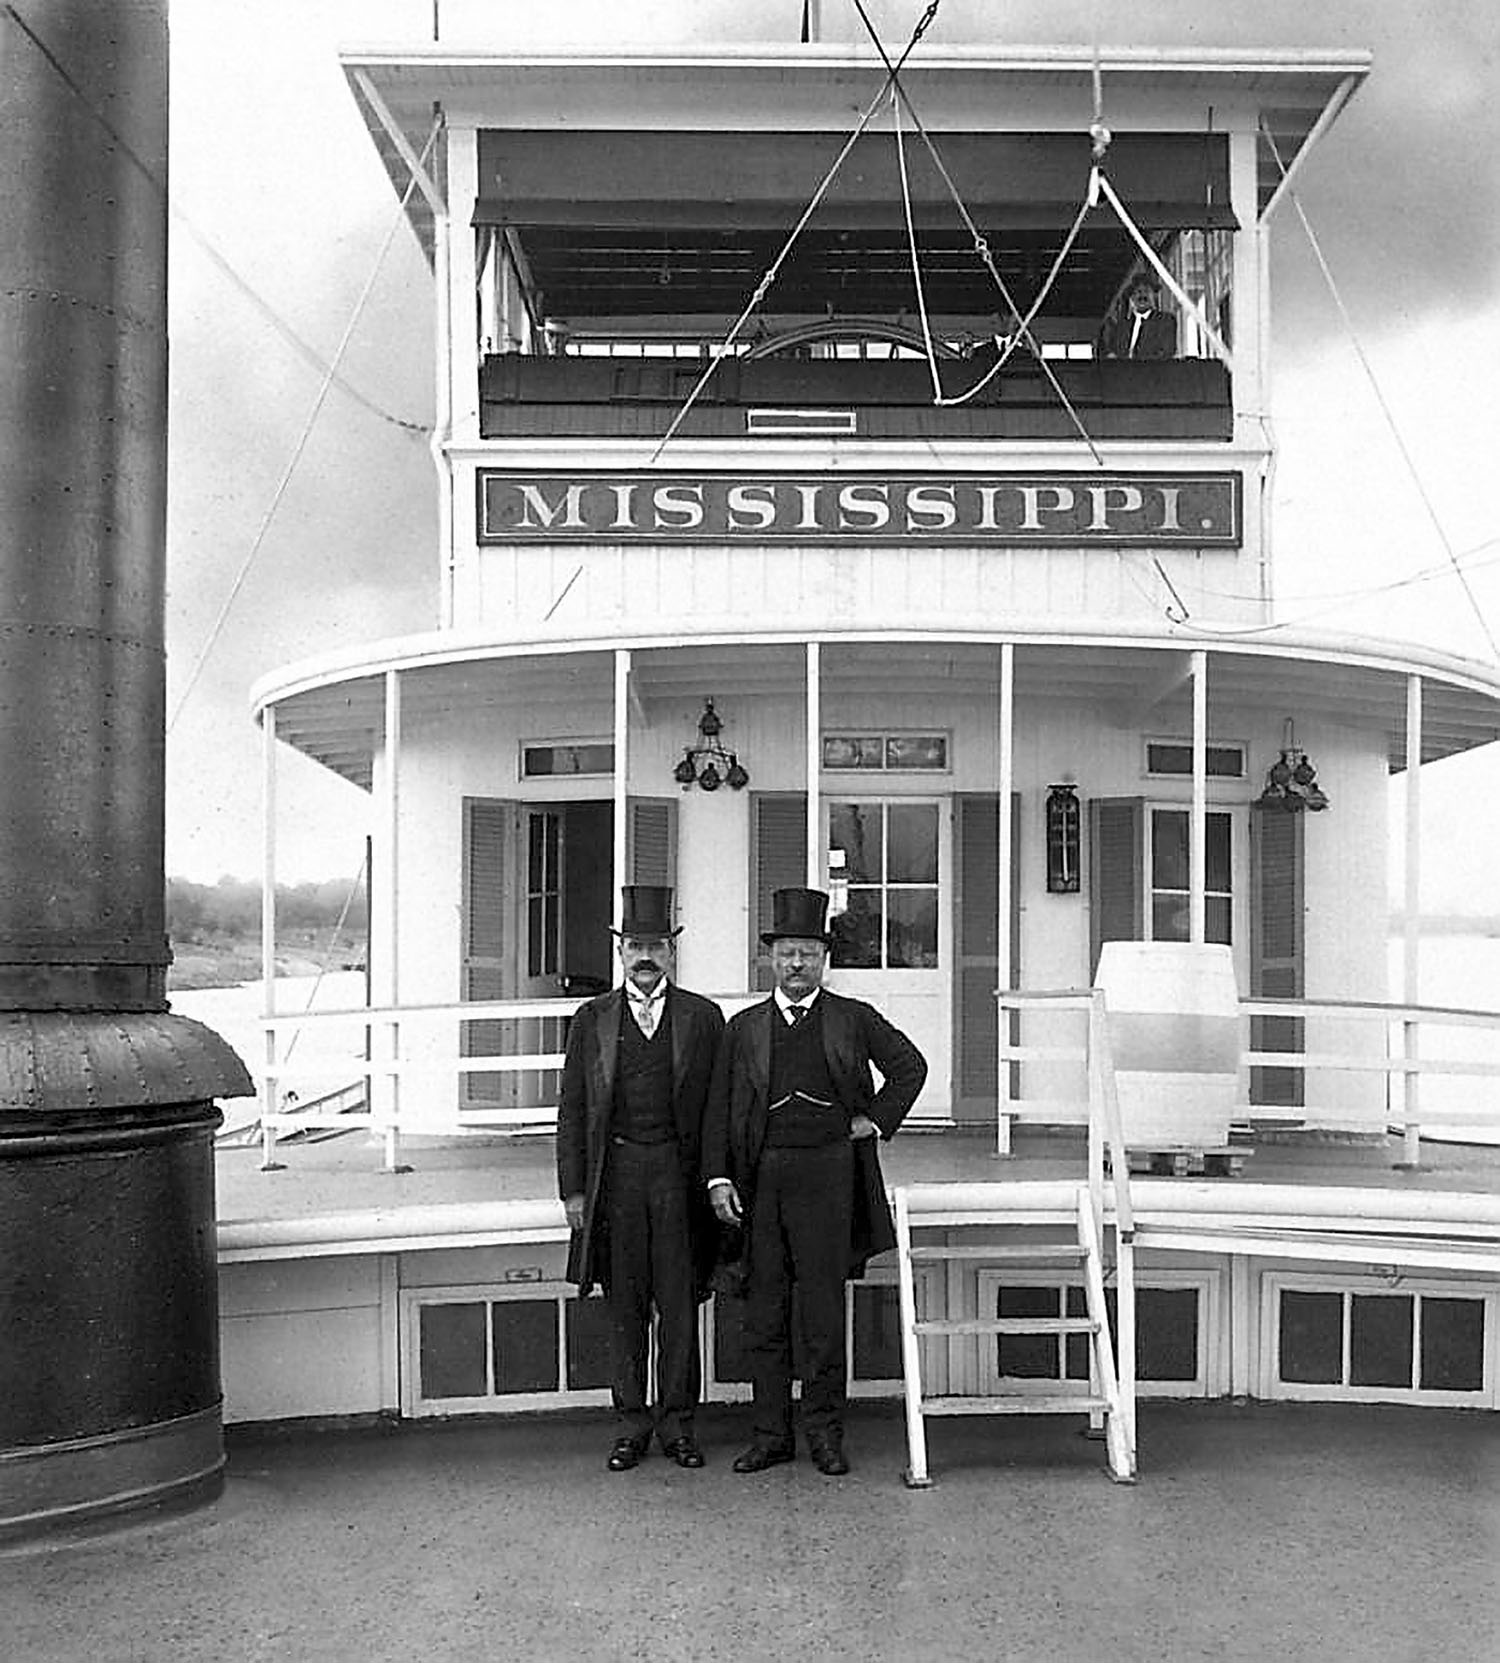 President Theodore Roosevelt (right) with Lt. John Mcllhenny aboard the Str. Mississippi in 1907. (Keith Norrington collection)